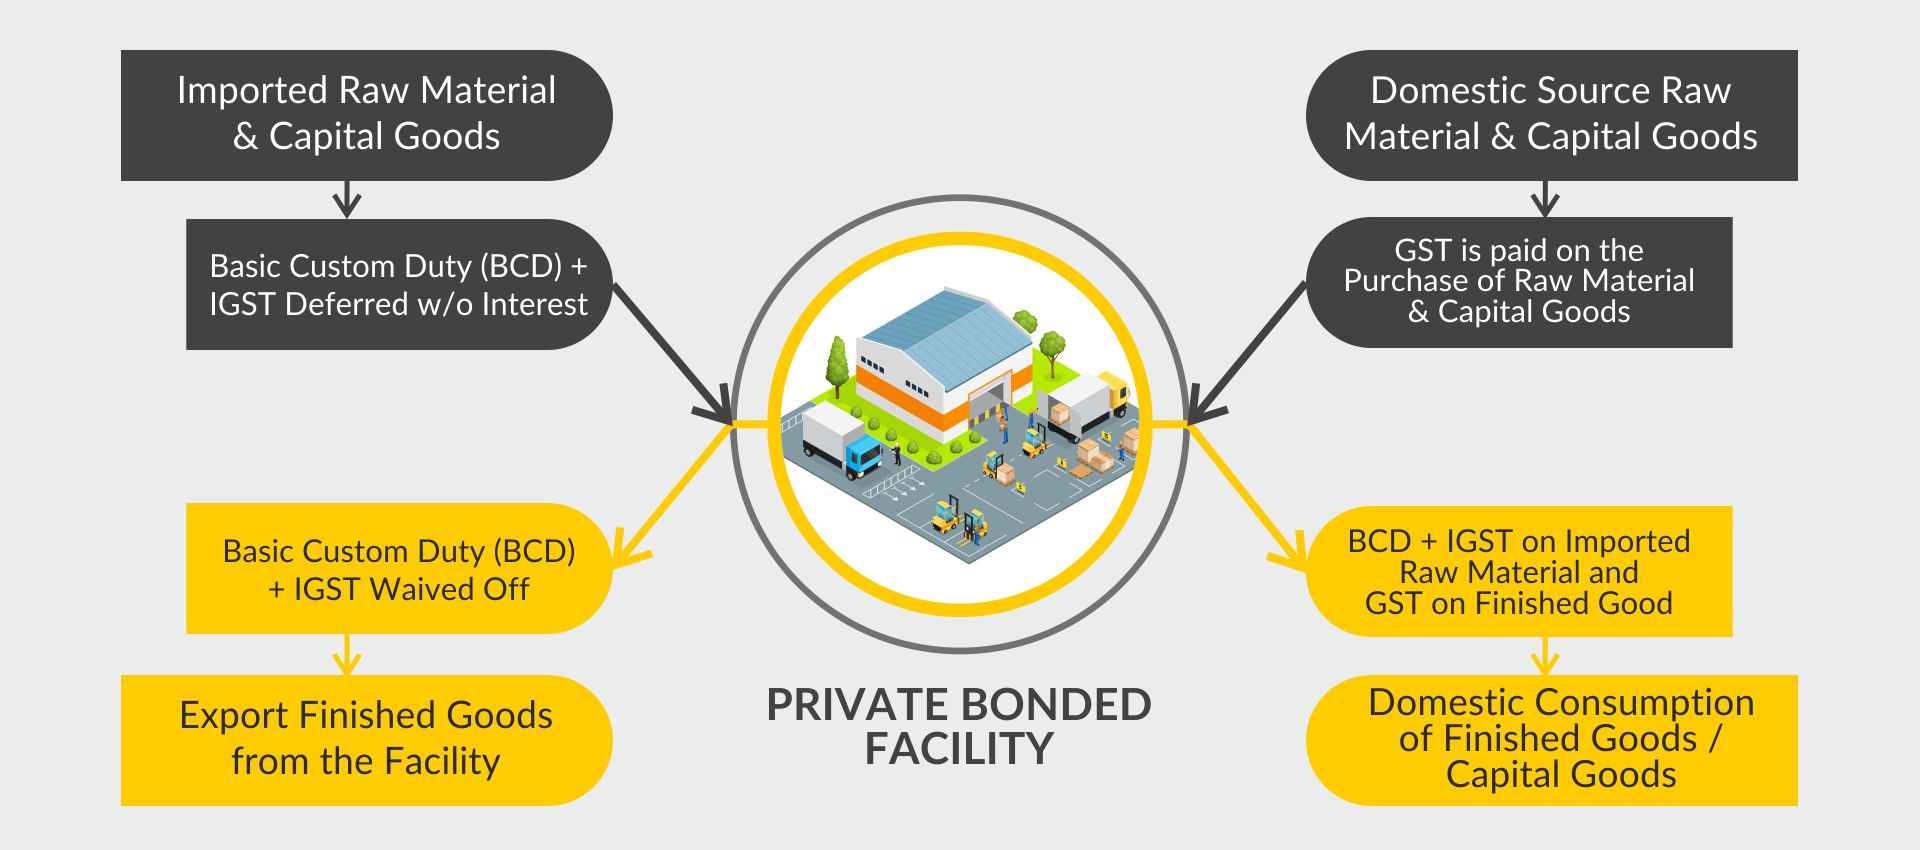 MOOWR Scheme-Bonded Manufacturing “A Game Changer”